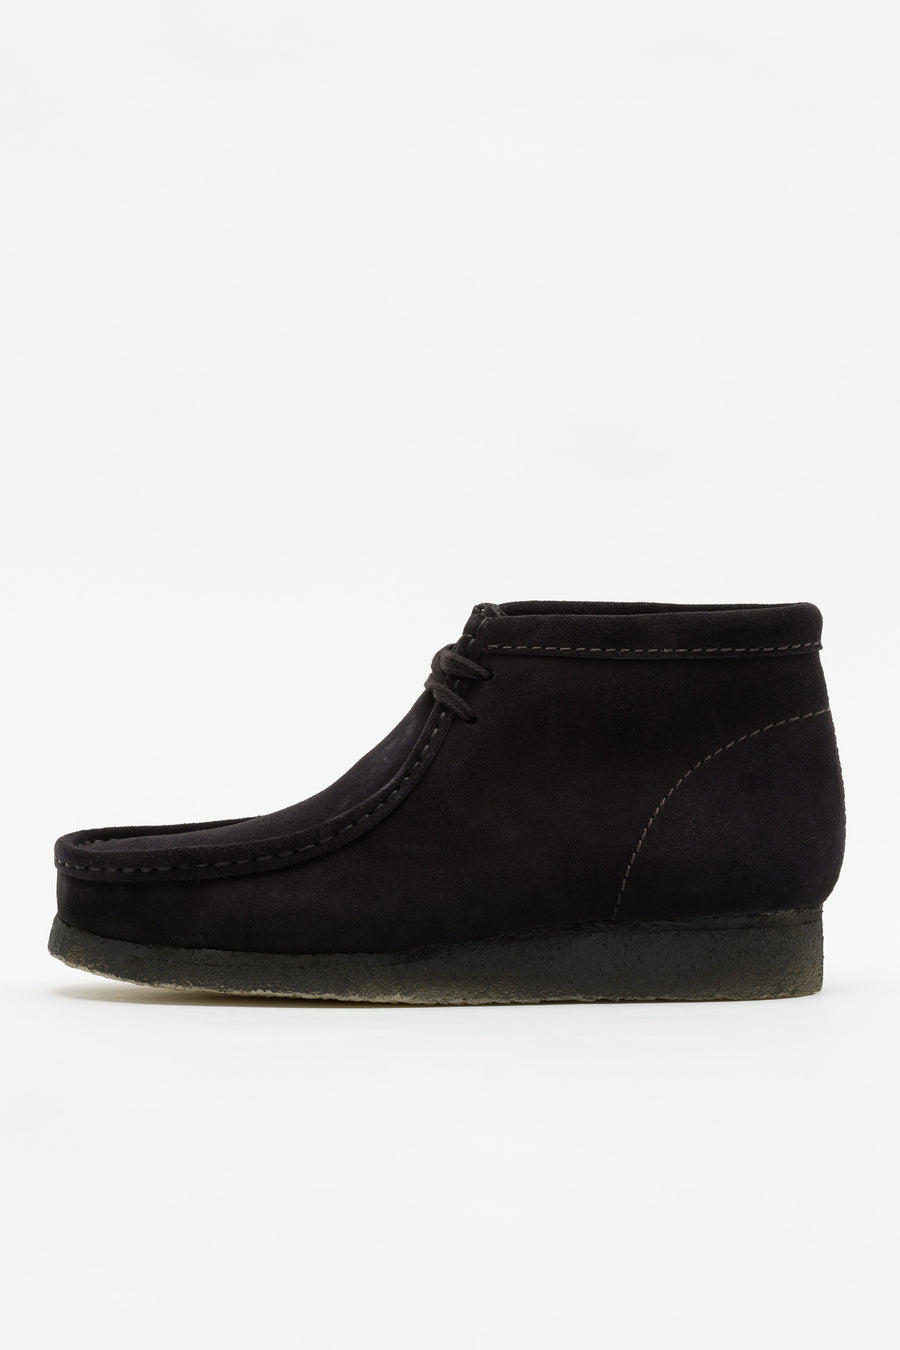 Wallabee Boot in Black Suede